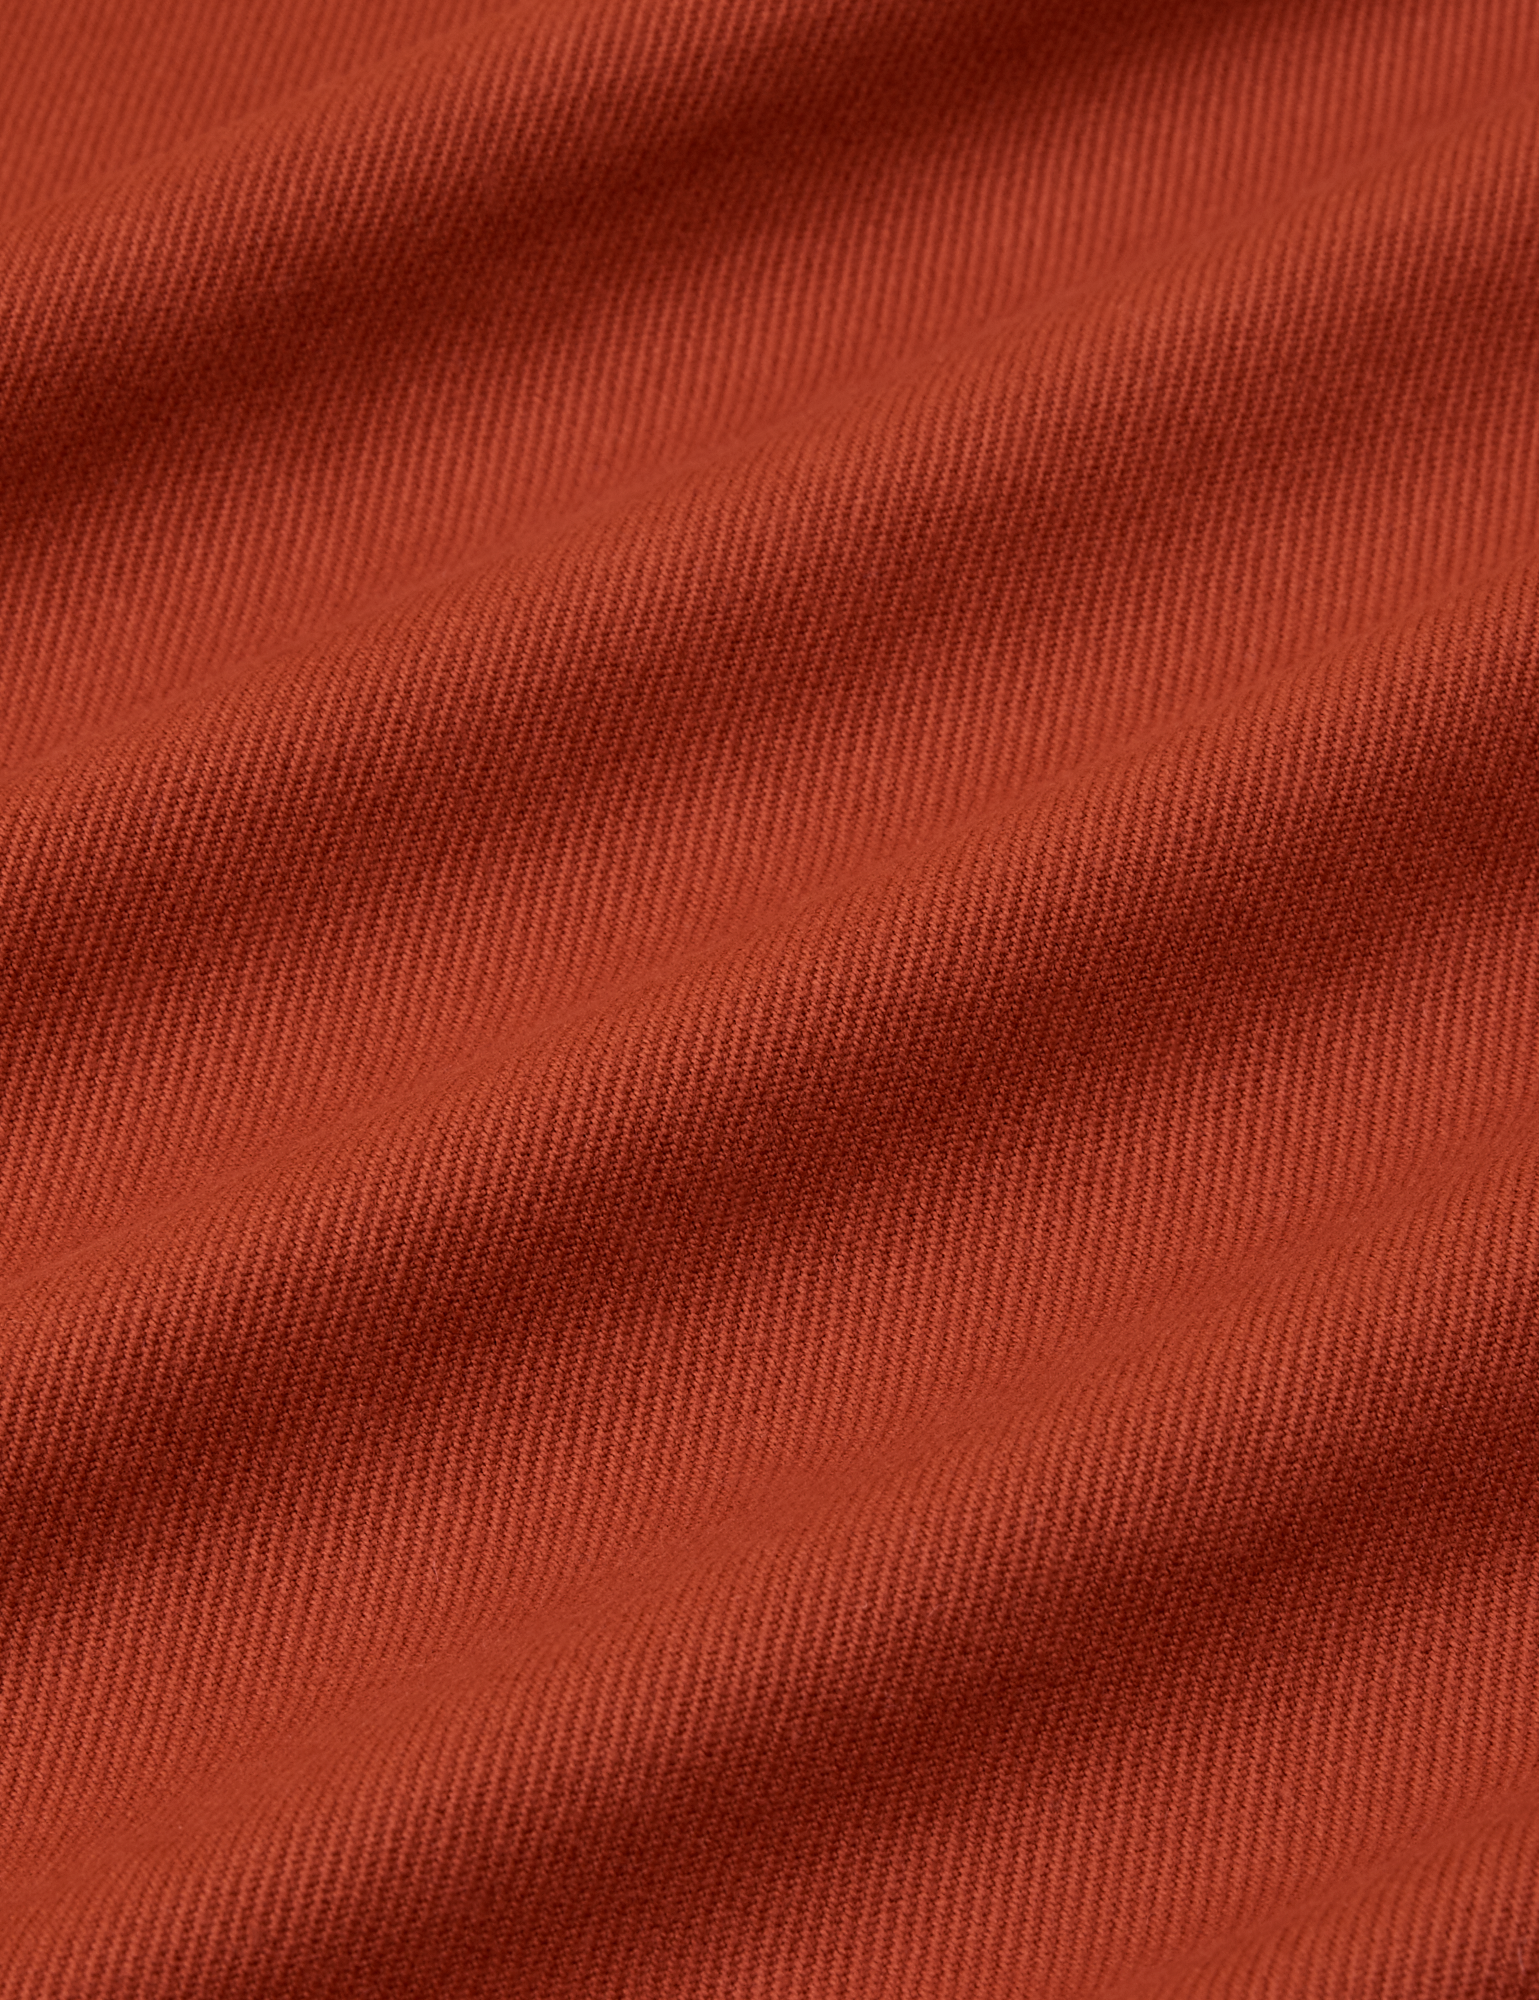 Flannel Overshirt in Paprika fabric detail close up